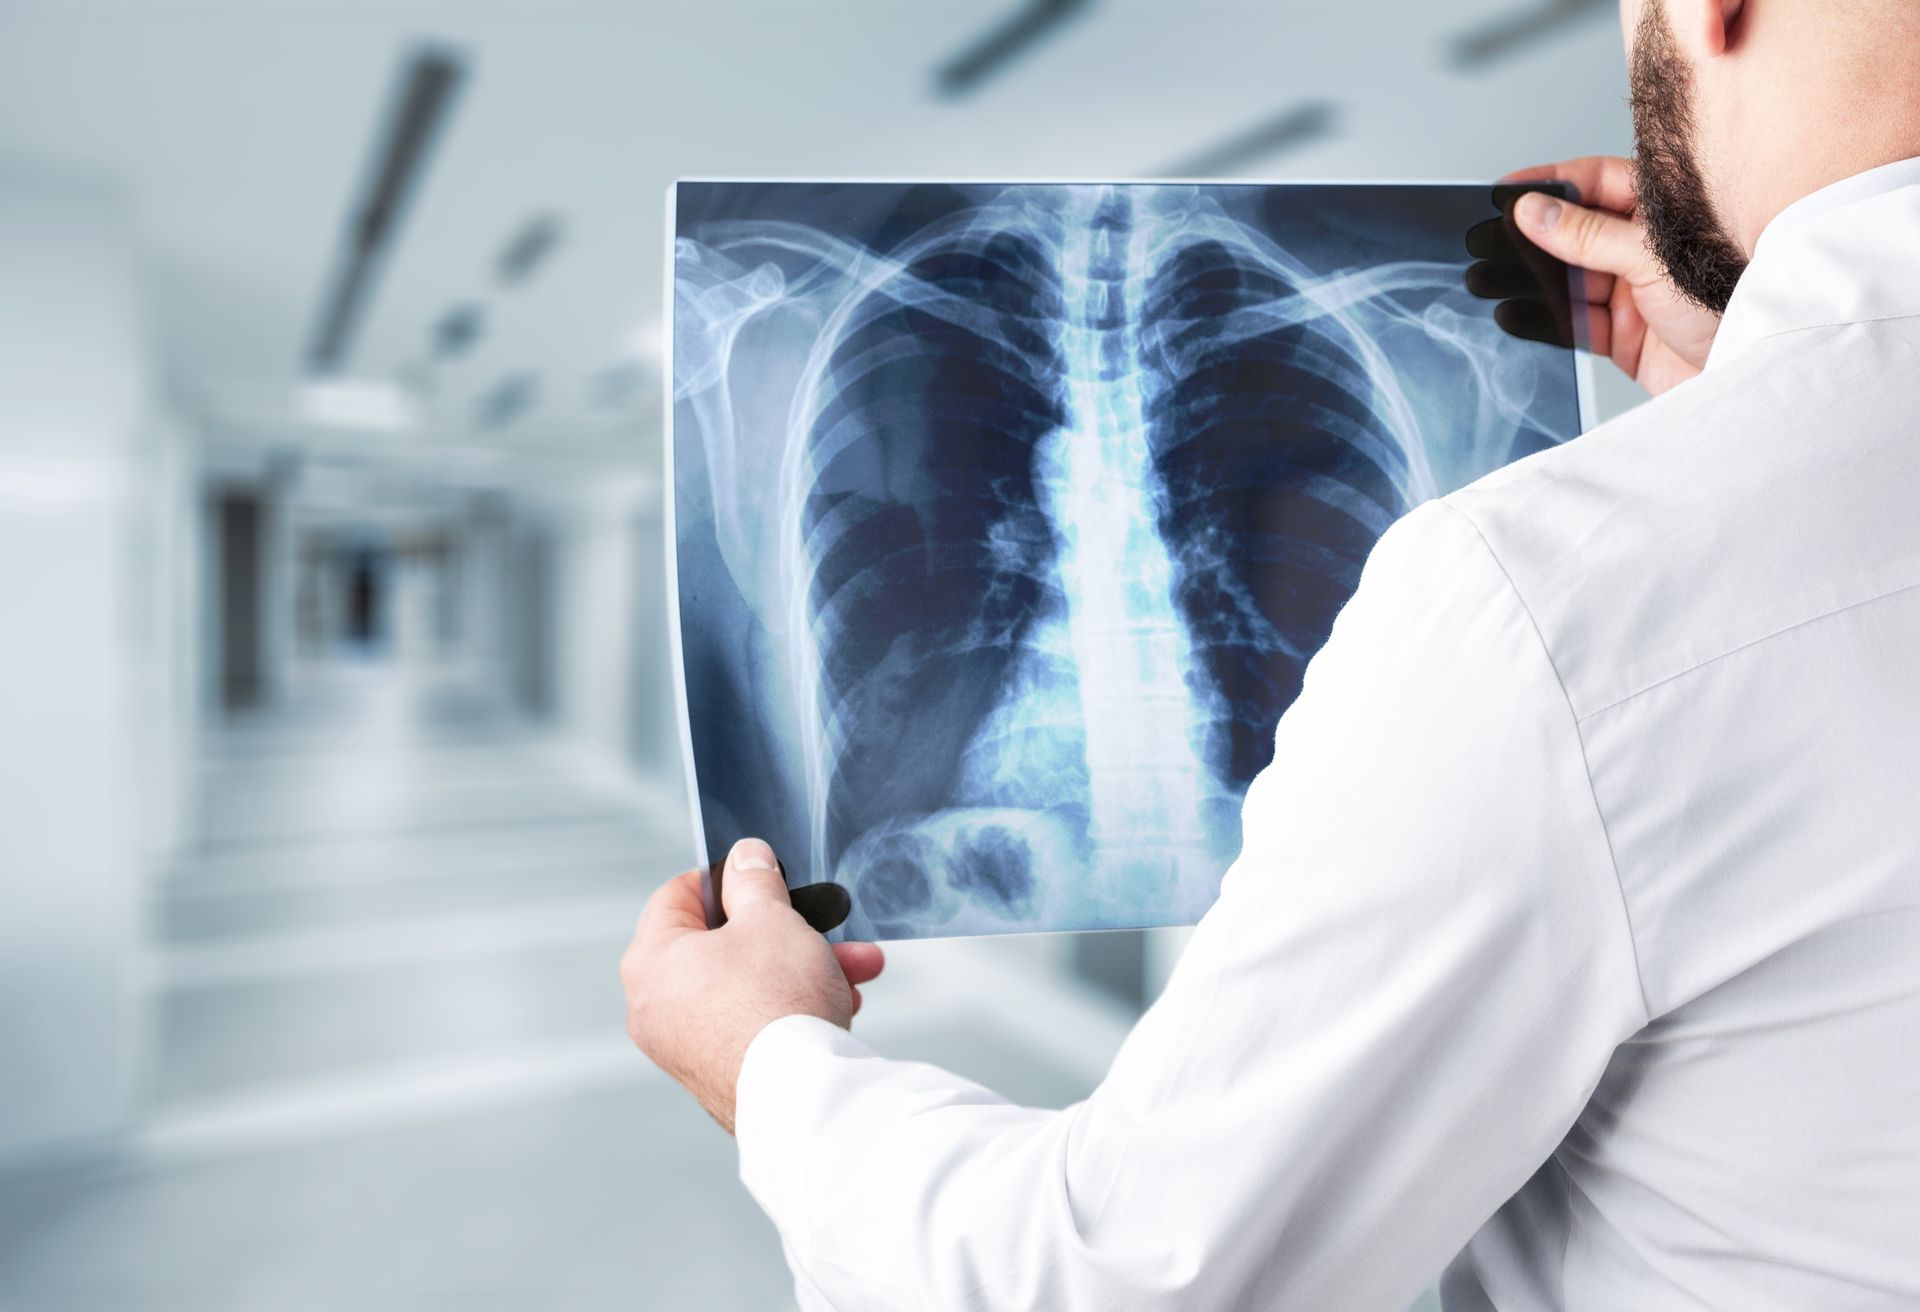 picture of doctor on the hallway turned back while showing an x-ray film of someone's chest.